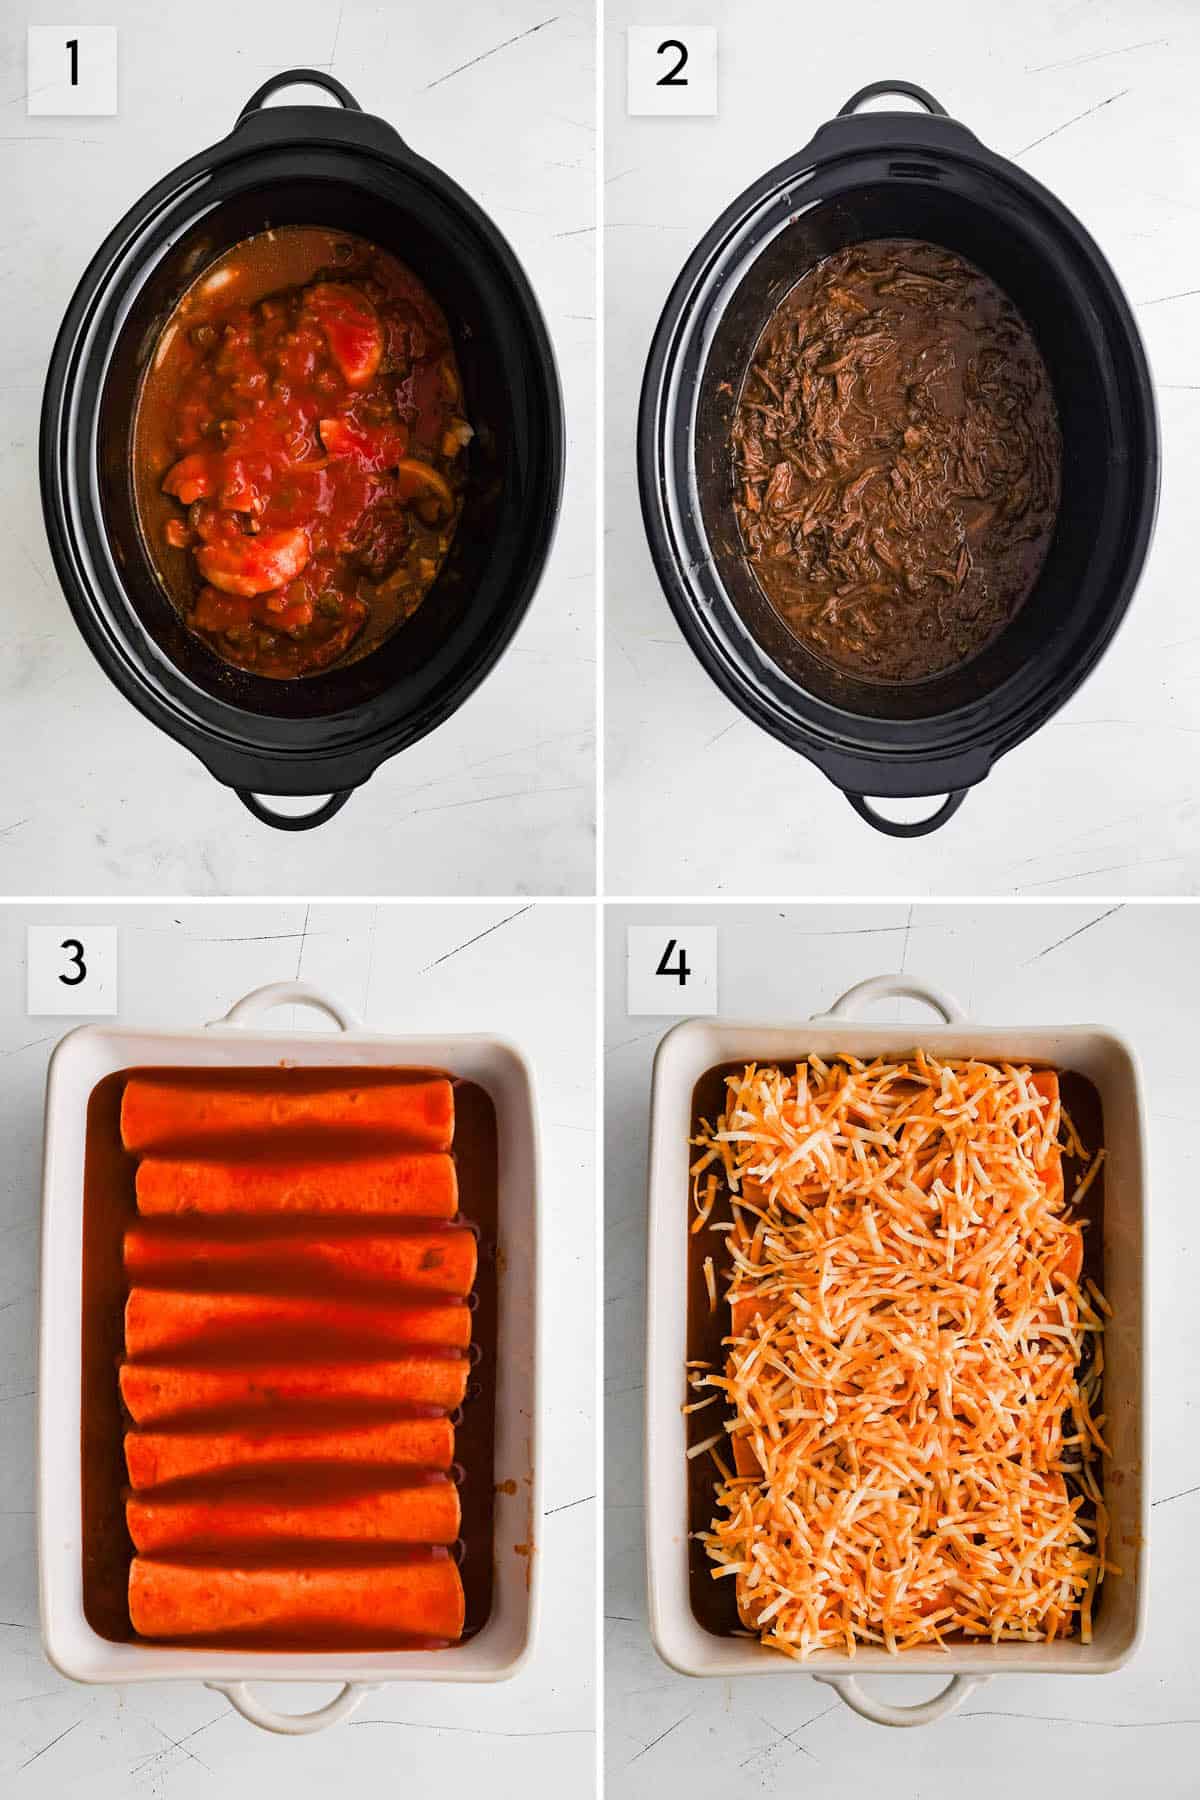 four panel collage showing different steps of preparing shredded beef enchiladas